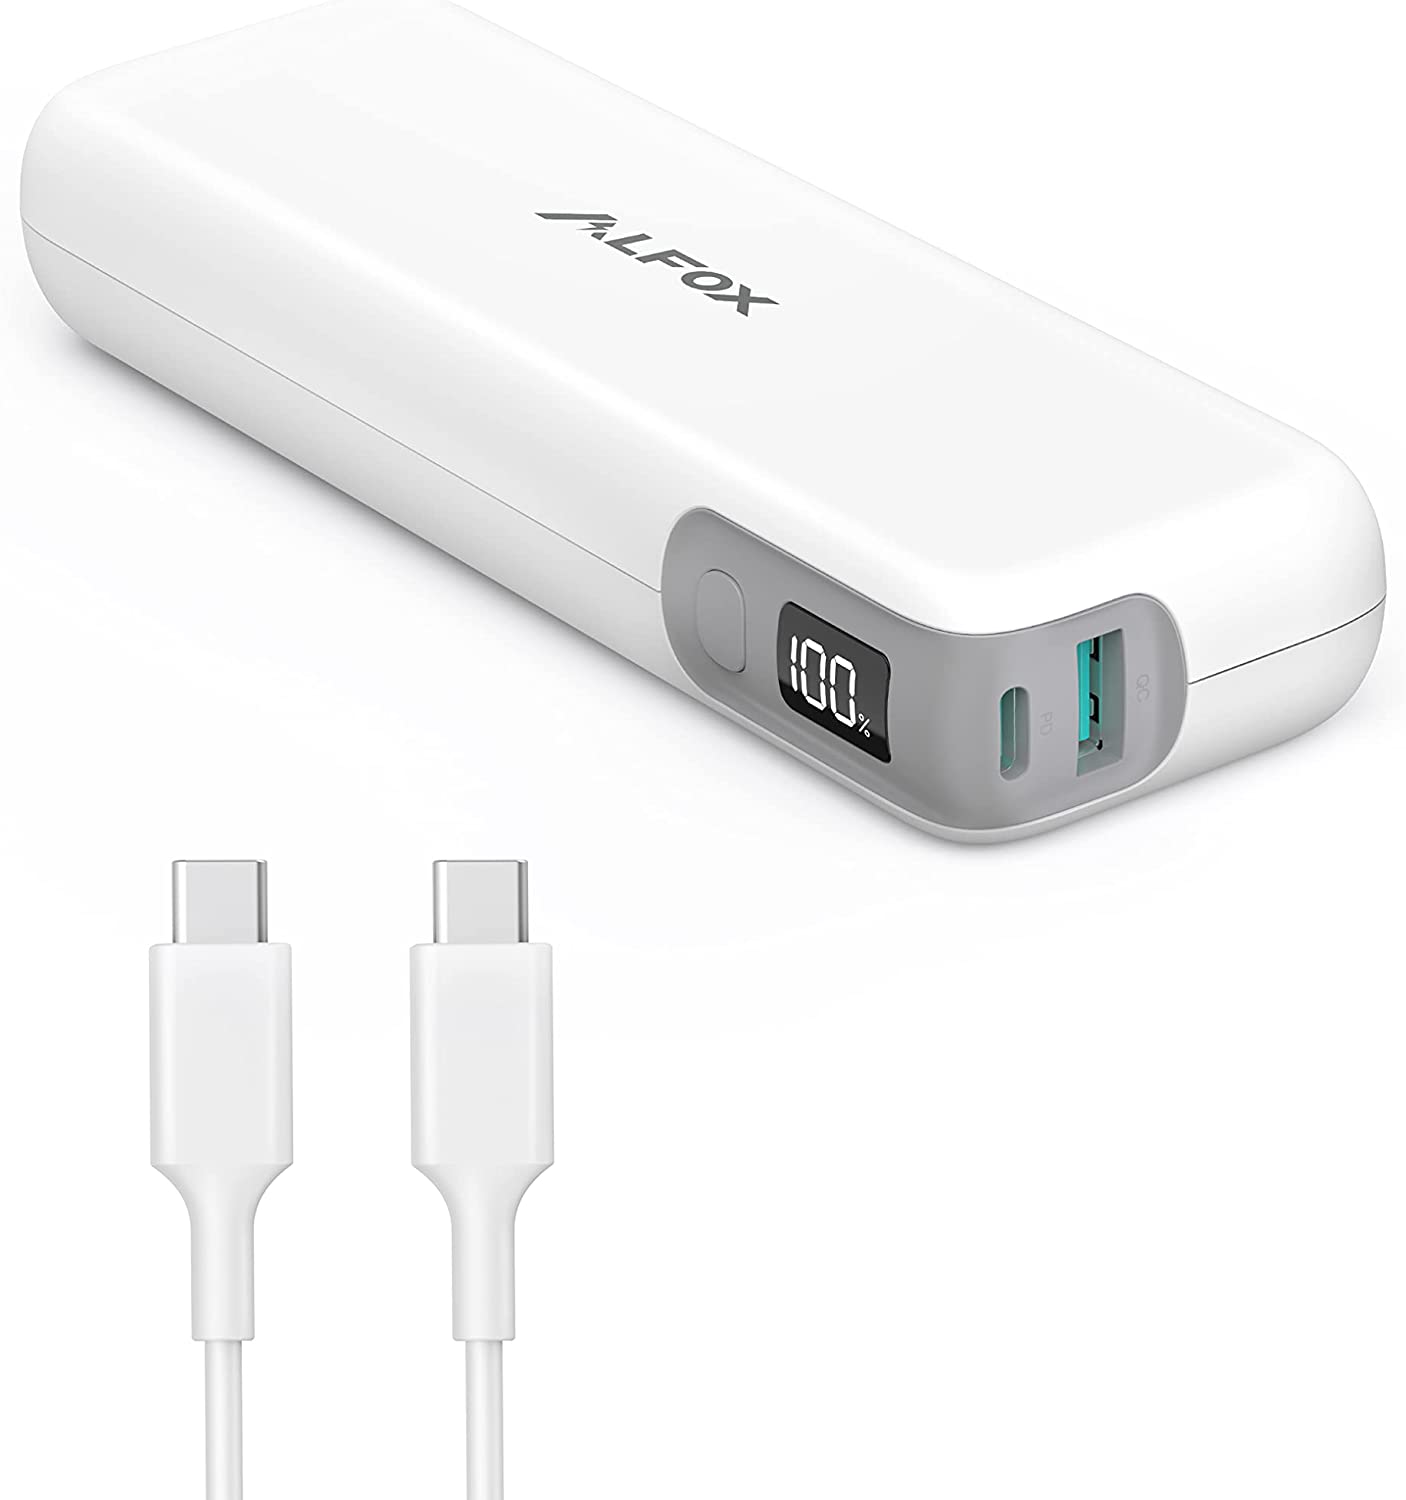 Polar tit Forbandet Portable Charger With Built-in Cables, Yoobao 10000mAh